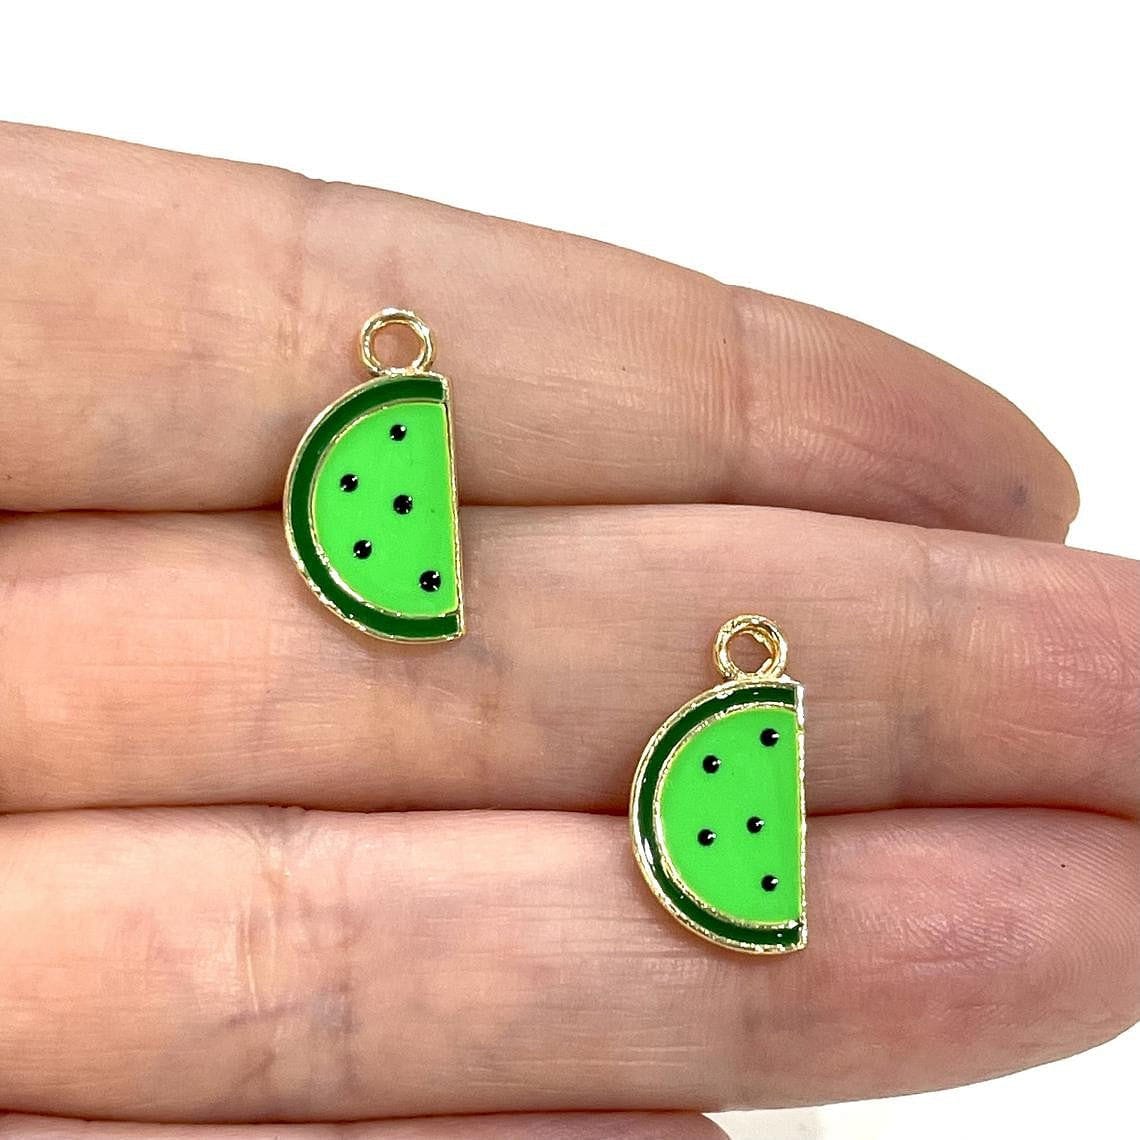 Gold Plated Enameled Watermelon Shaking Attachment - Neon Green